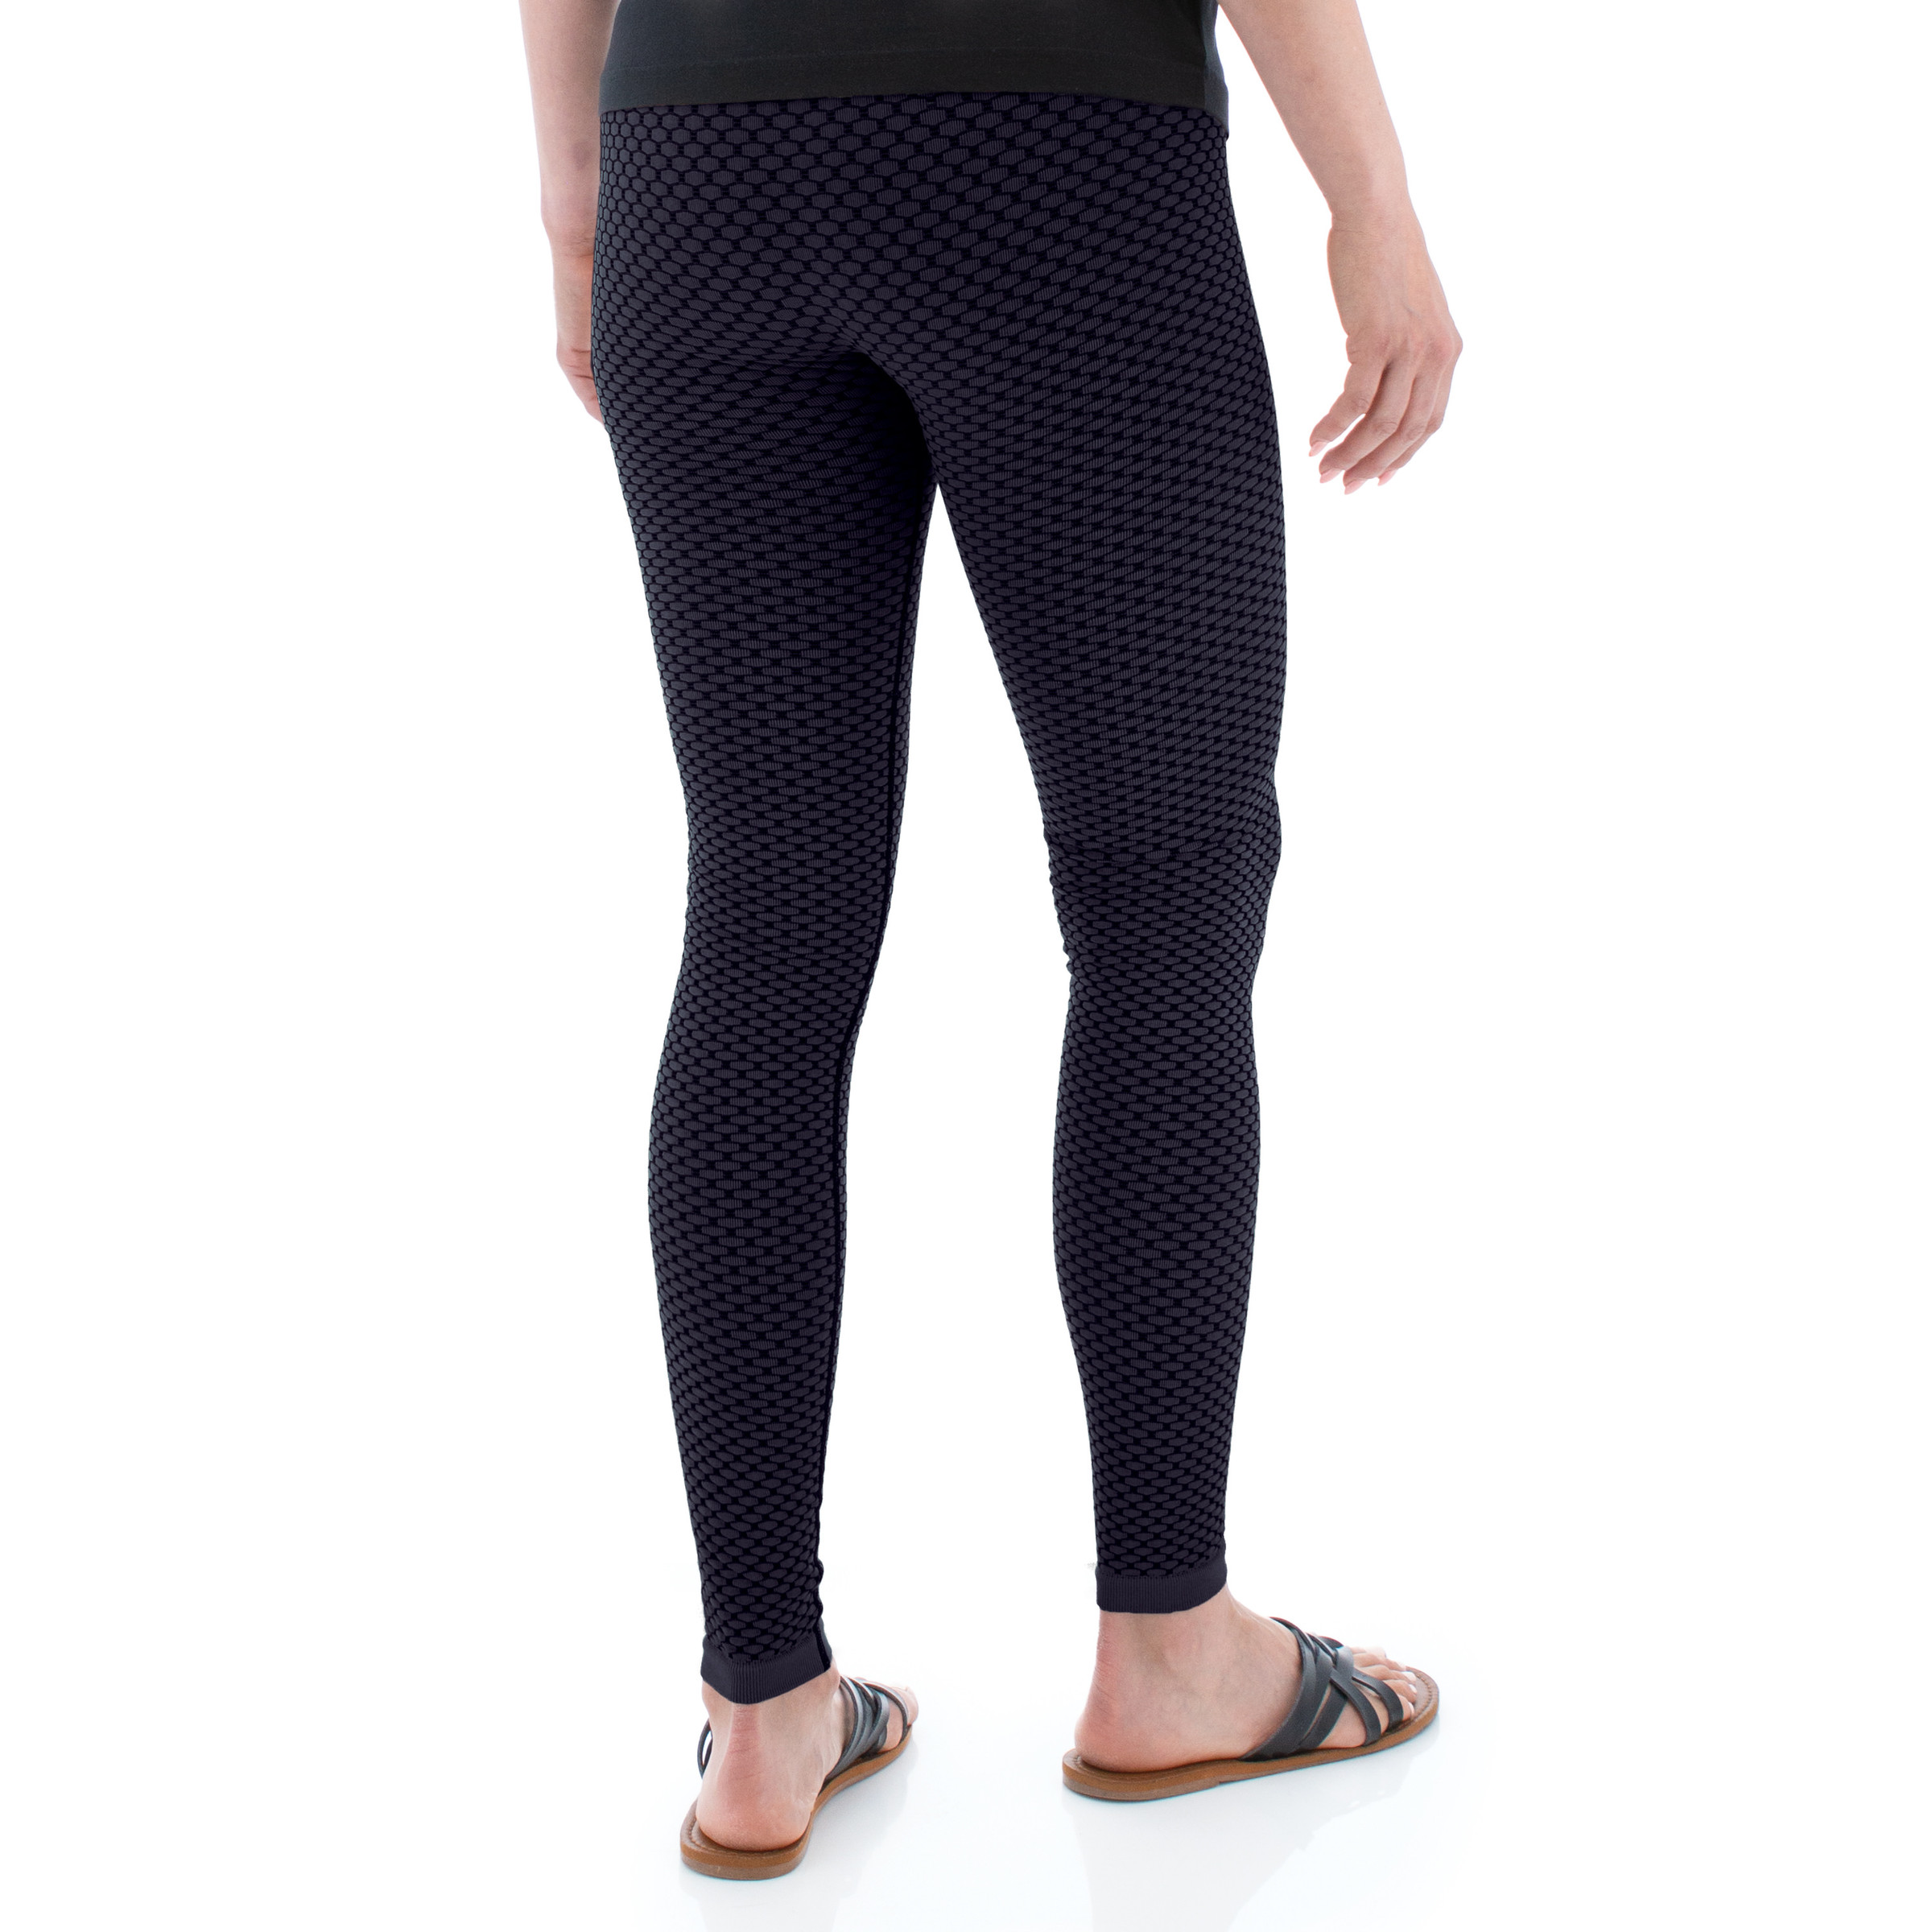 Women's Honeycomb Footless Tights